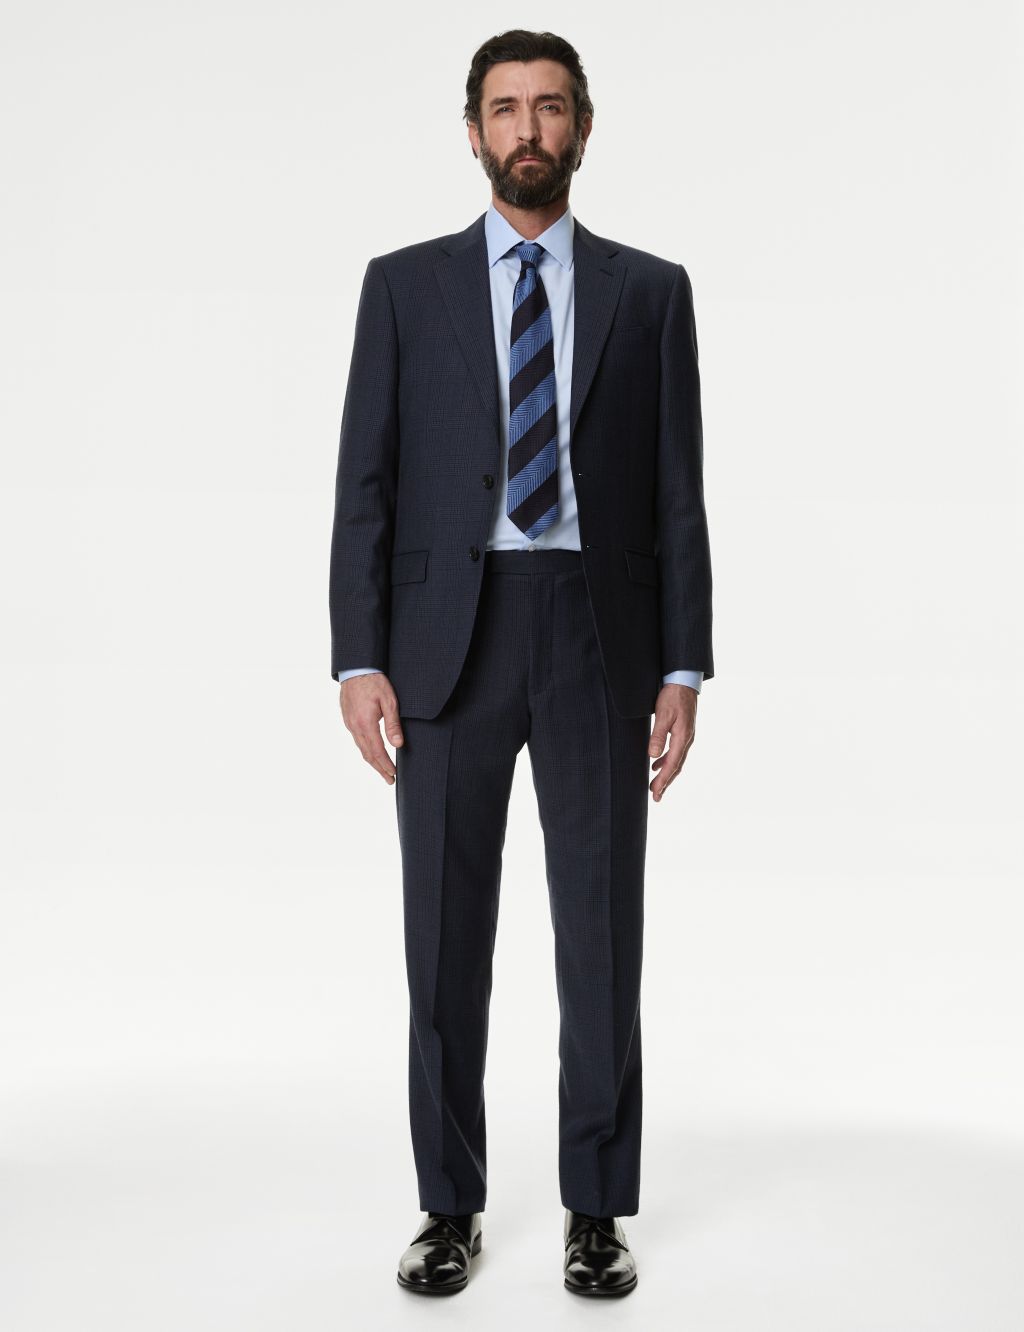 Buy Page 2 - Men's Suits from the M&S UK Online Shop